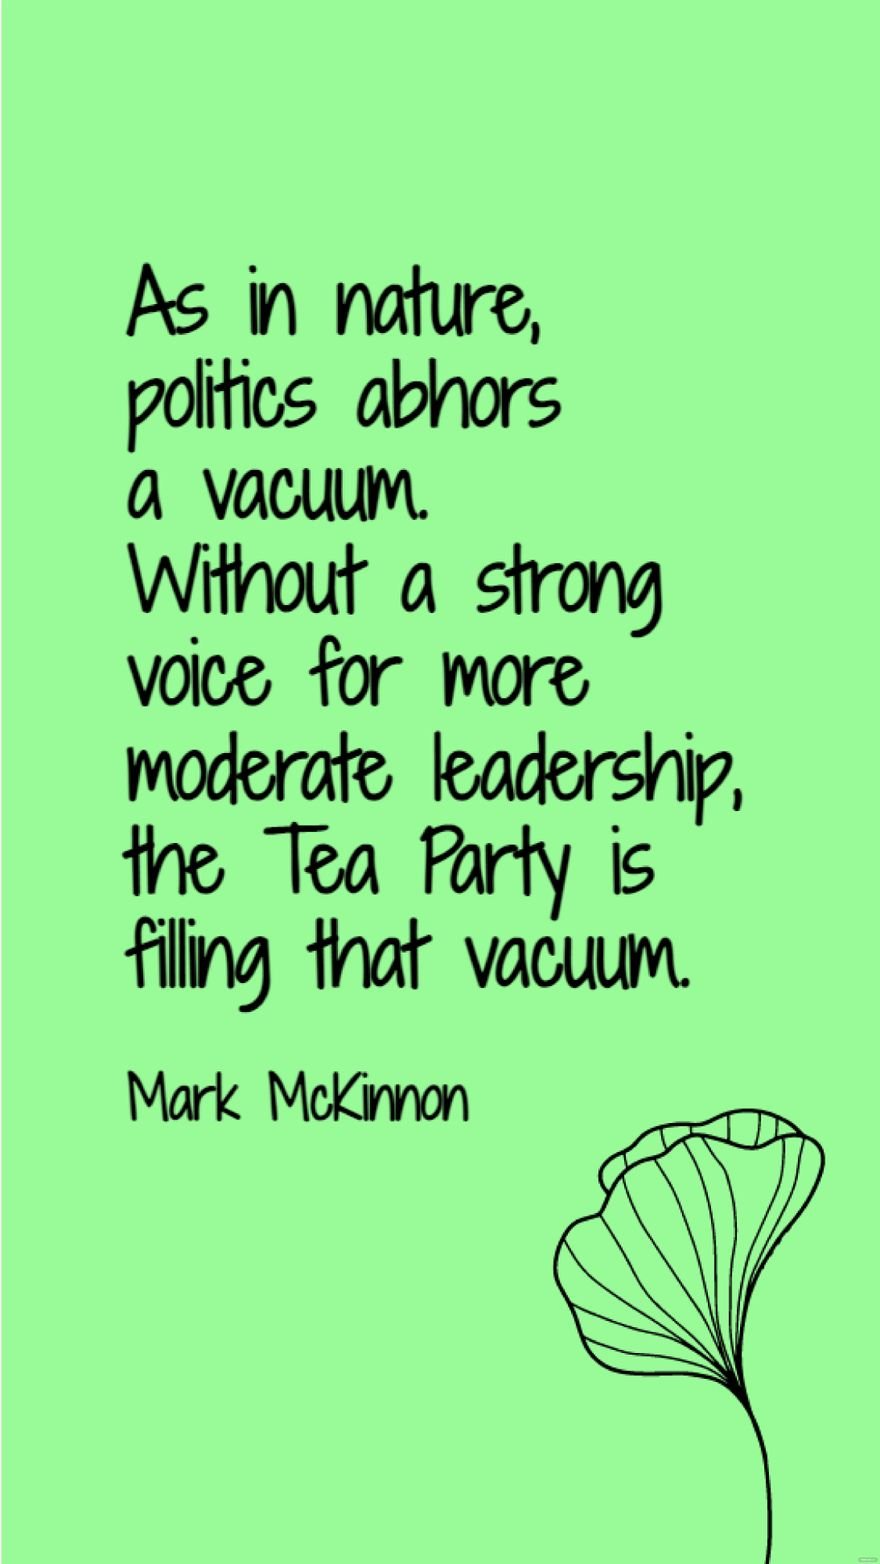 Mark McKinnon - As in nature, politics abhors a vacuum. Without a strong voice for more moderate leadership, the Tea Party is filling that vacuum.